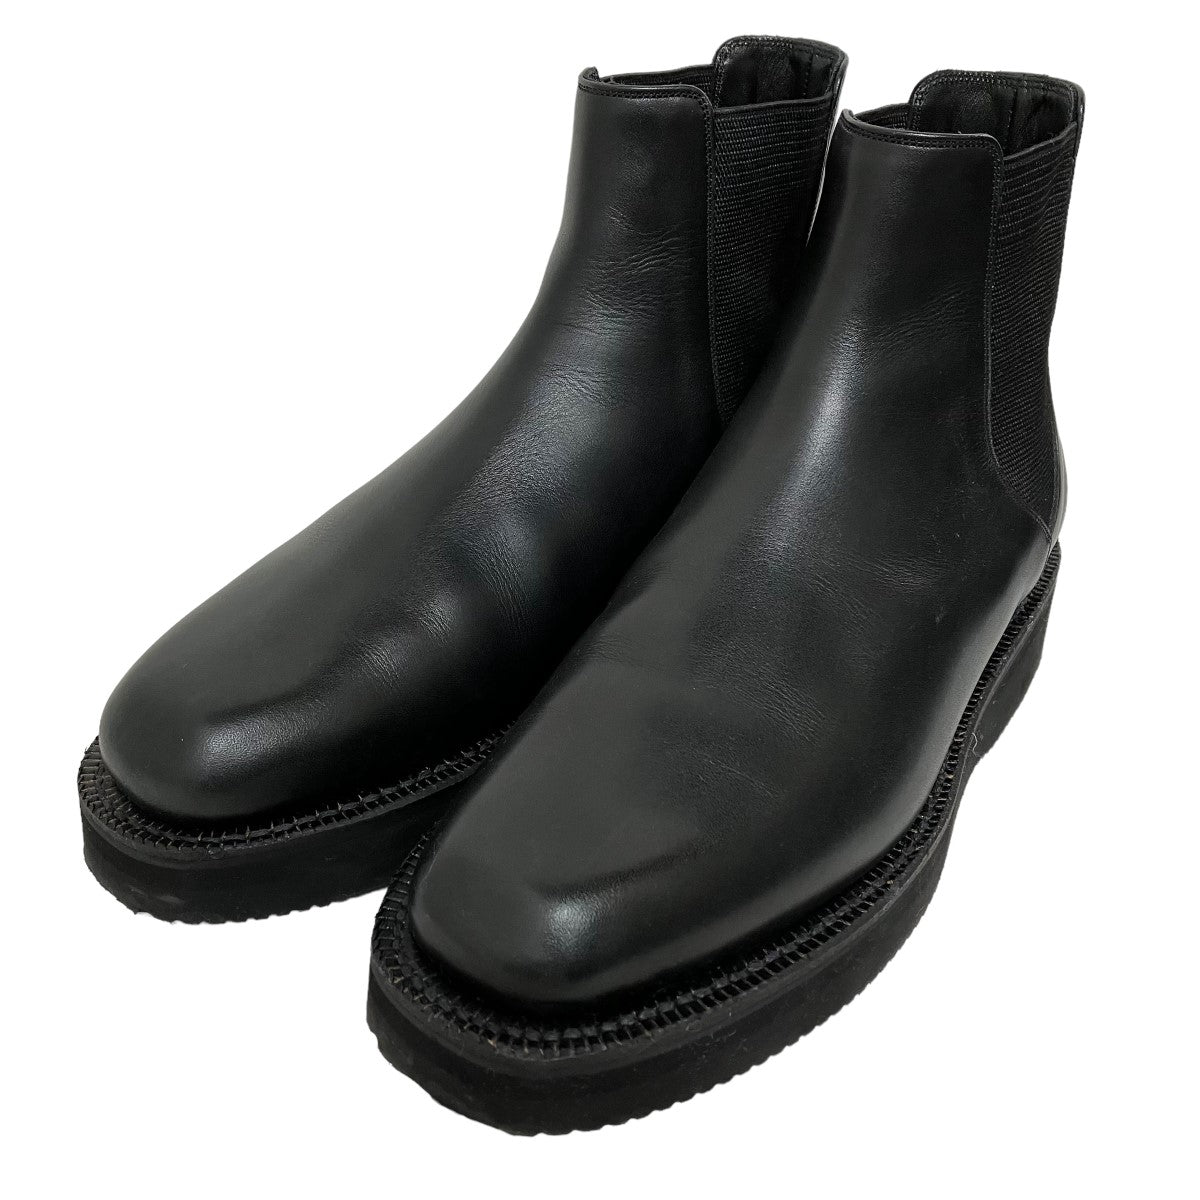 AURALEE(オーラリー) 箱 LEATHER SQUARE BOOTS MADE BY FOOT THE  COACHERサイドゴアブーツA22AS01FT A22AS01FT ブラック サイズ 16｜【公式】カインドオルオンライン  ブランド古着・中古通販【kindal】